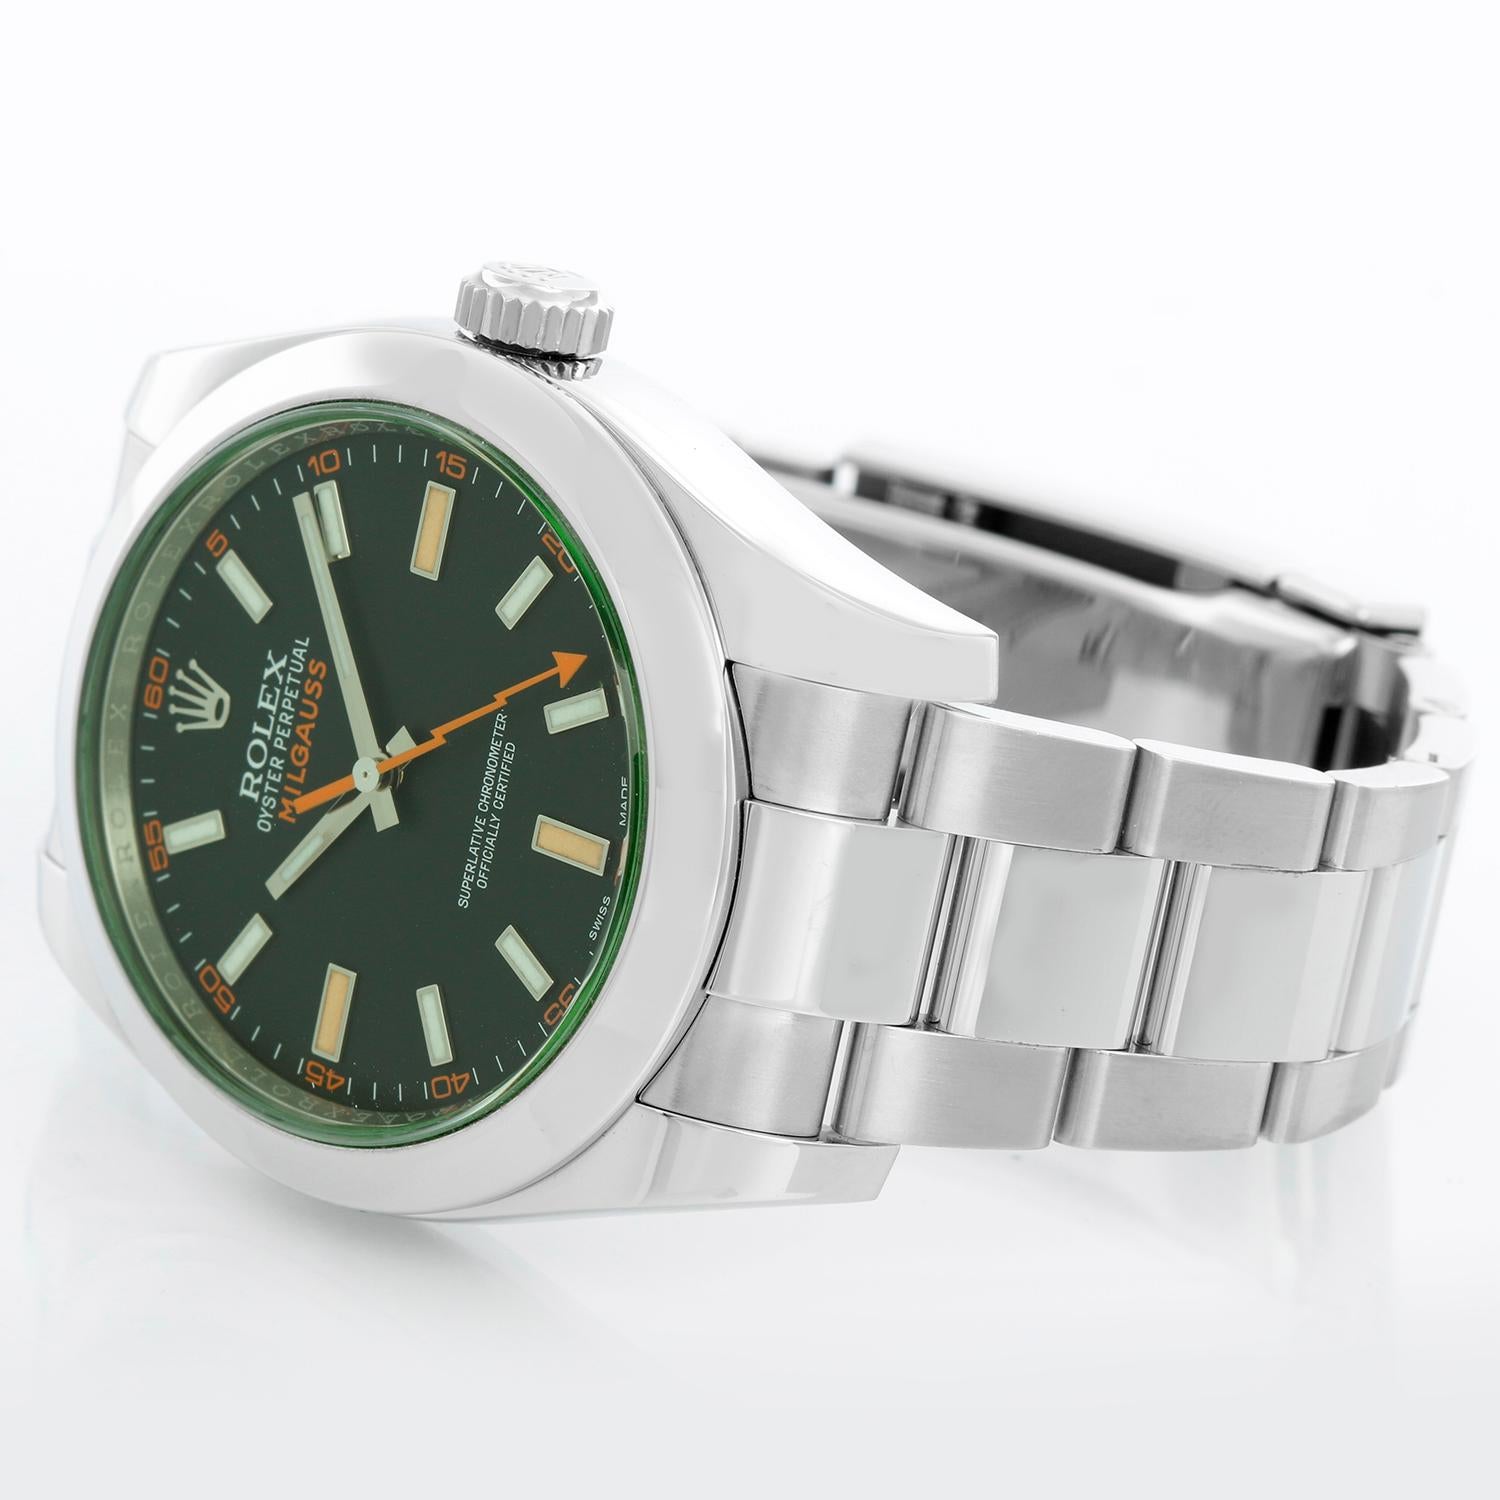 Rolex Green Milgauss Crystal Anniversary Model 116400GV - Automatic winding, green sapphire crystal, 31 jewels. Stainless steel case with smooth bezel (40mm diameter). Black dial with luminous style and orange markers. Stainless steel Oyster